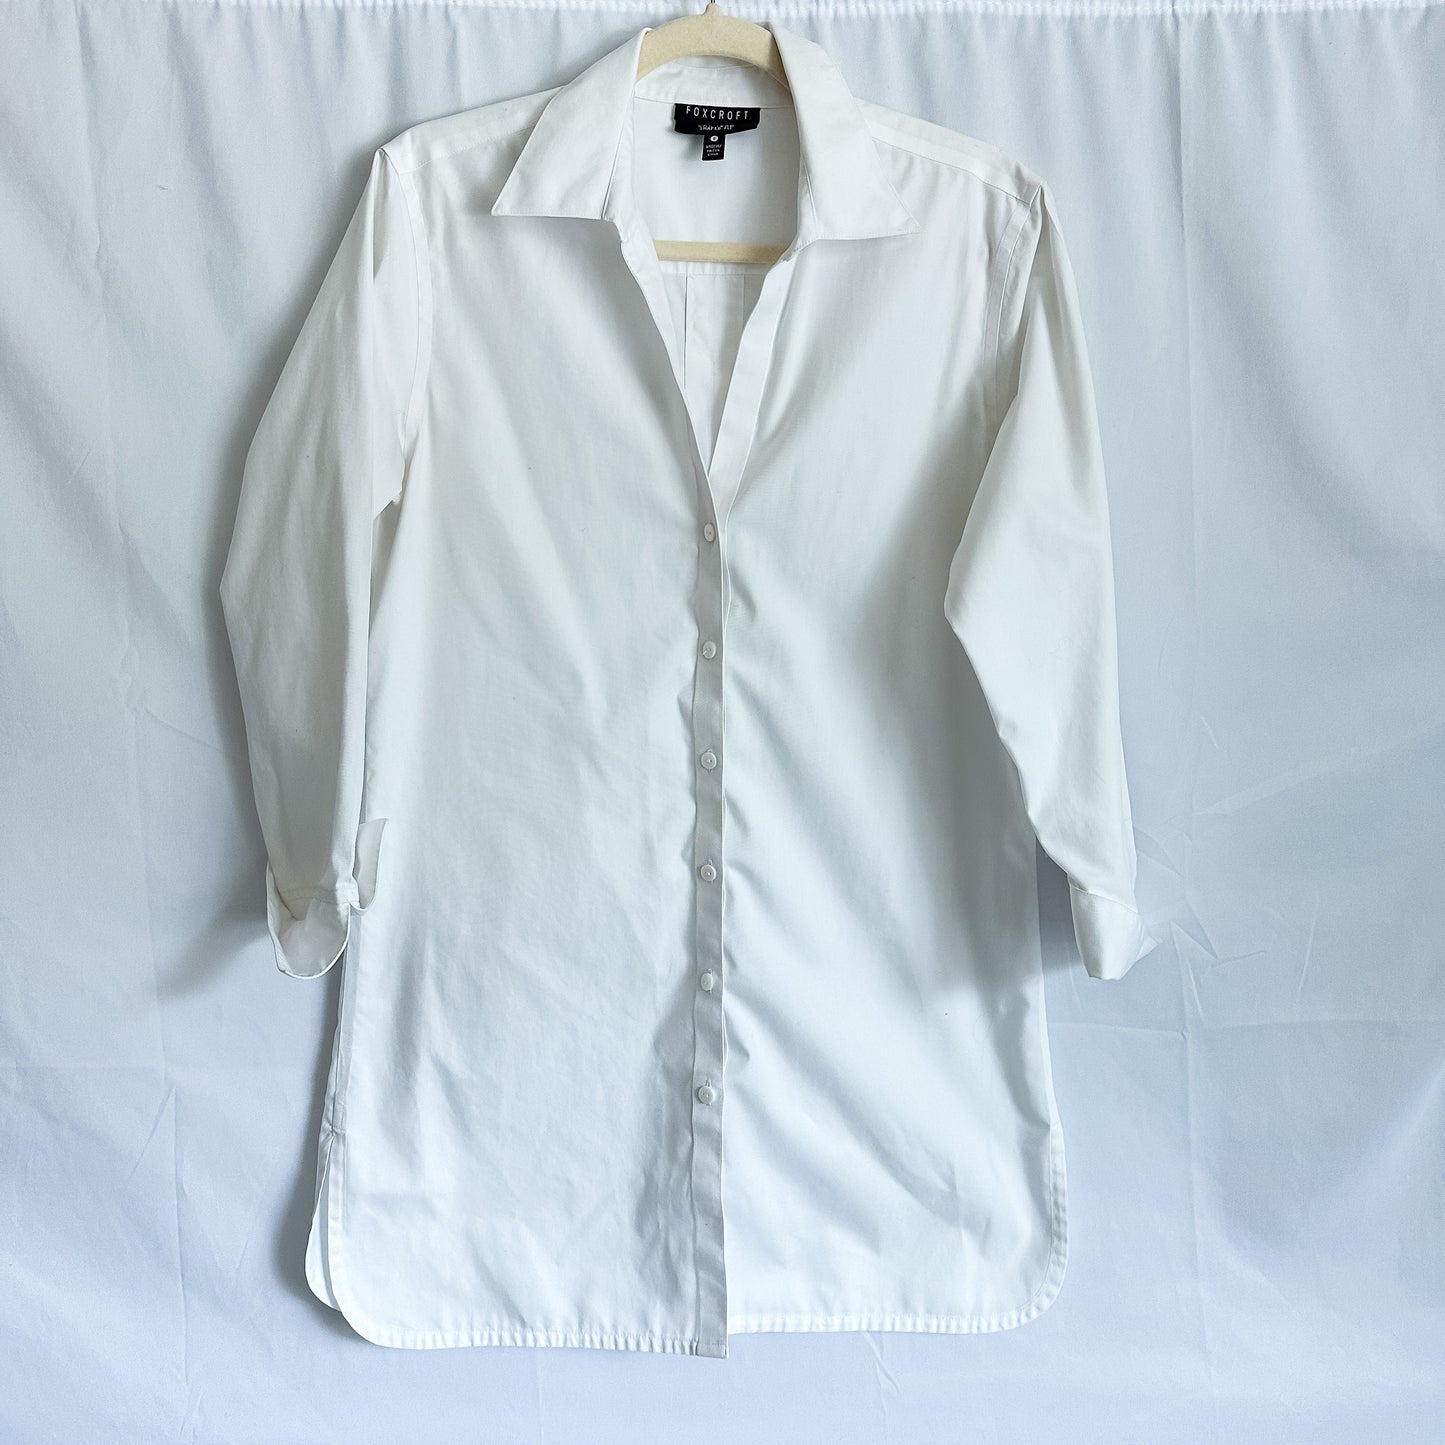 White Tunic Length Button Down Top (fits XS-S)